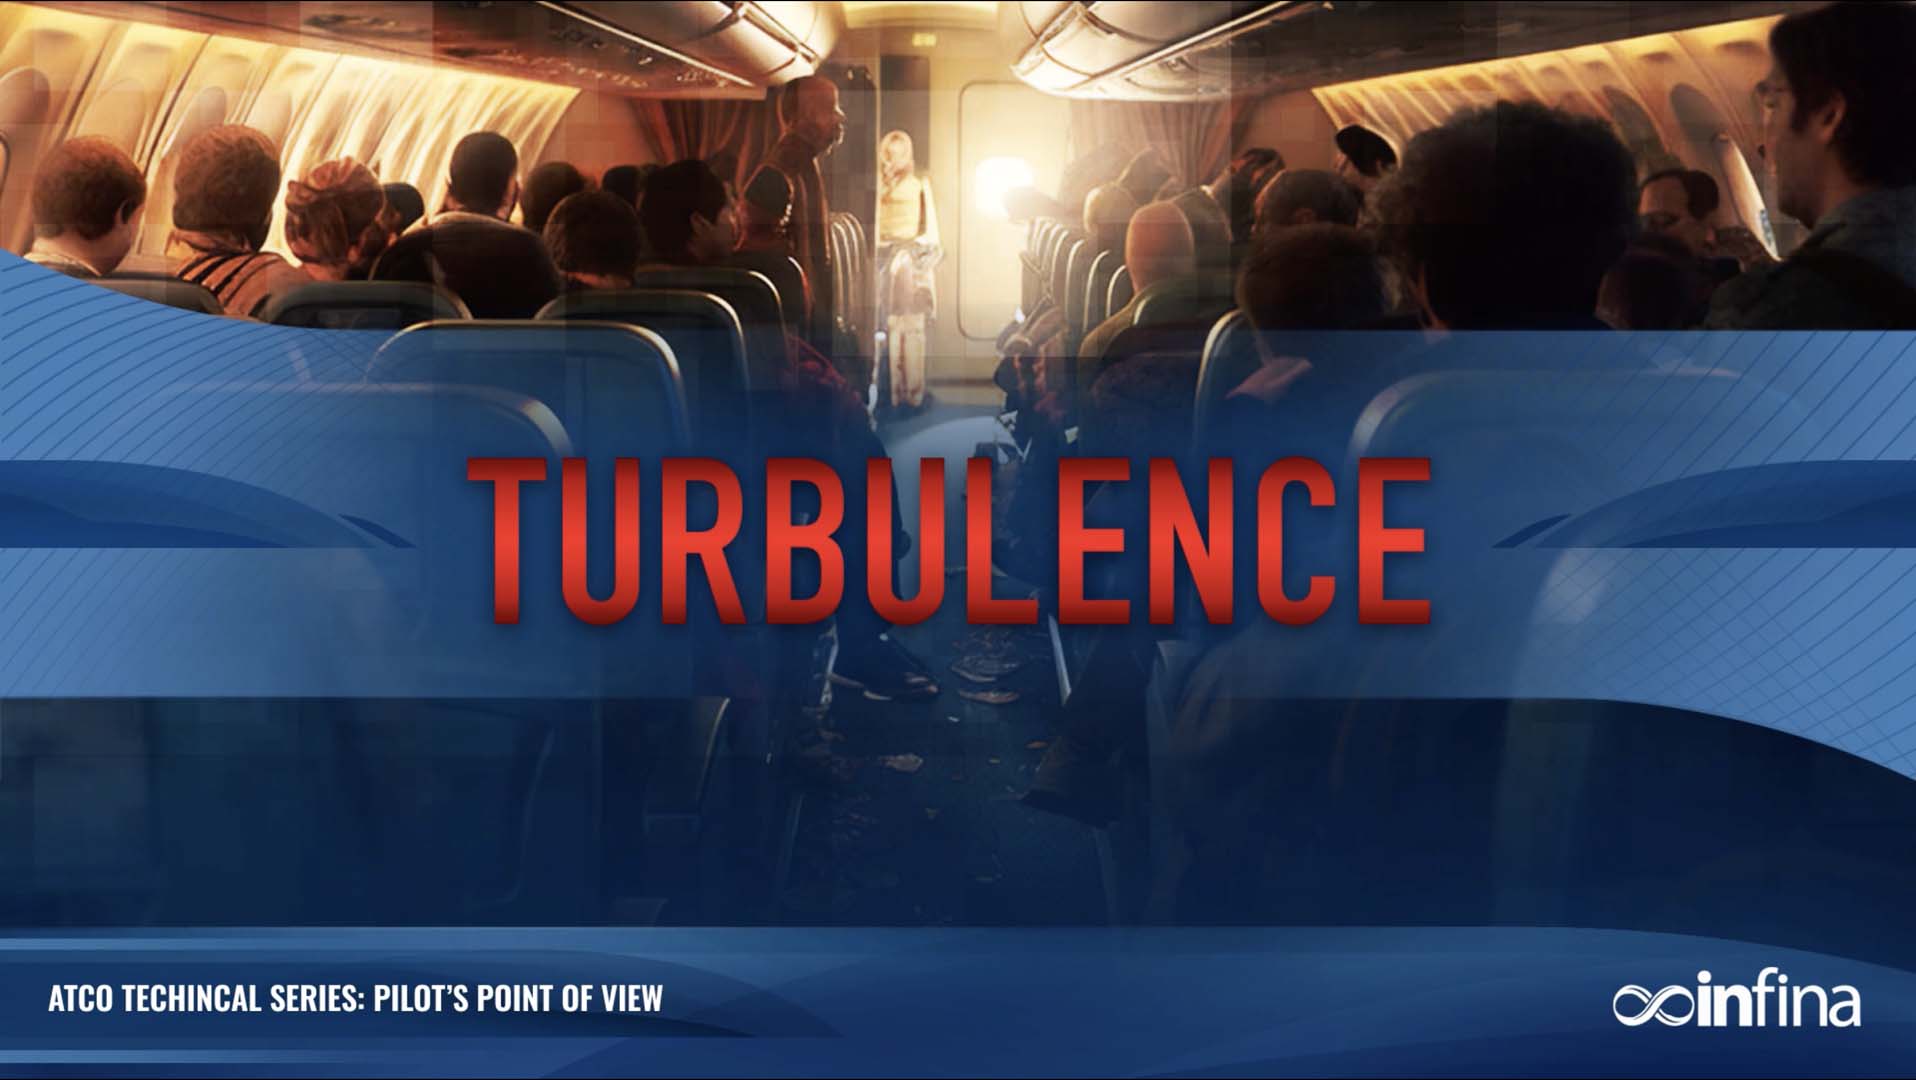 For ATCOs from Pilots: Turbulence